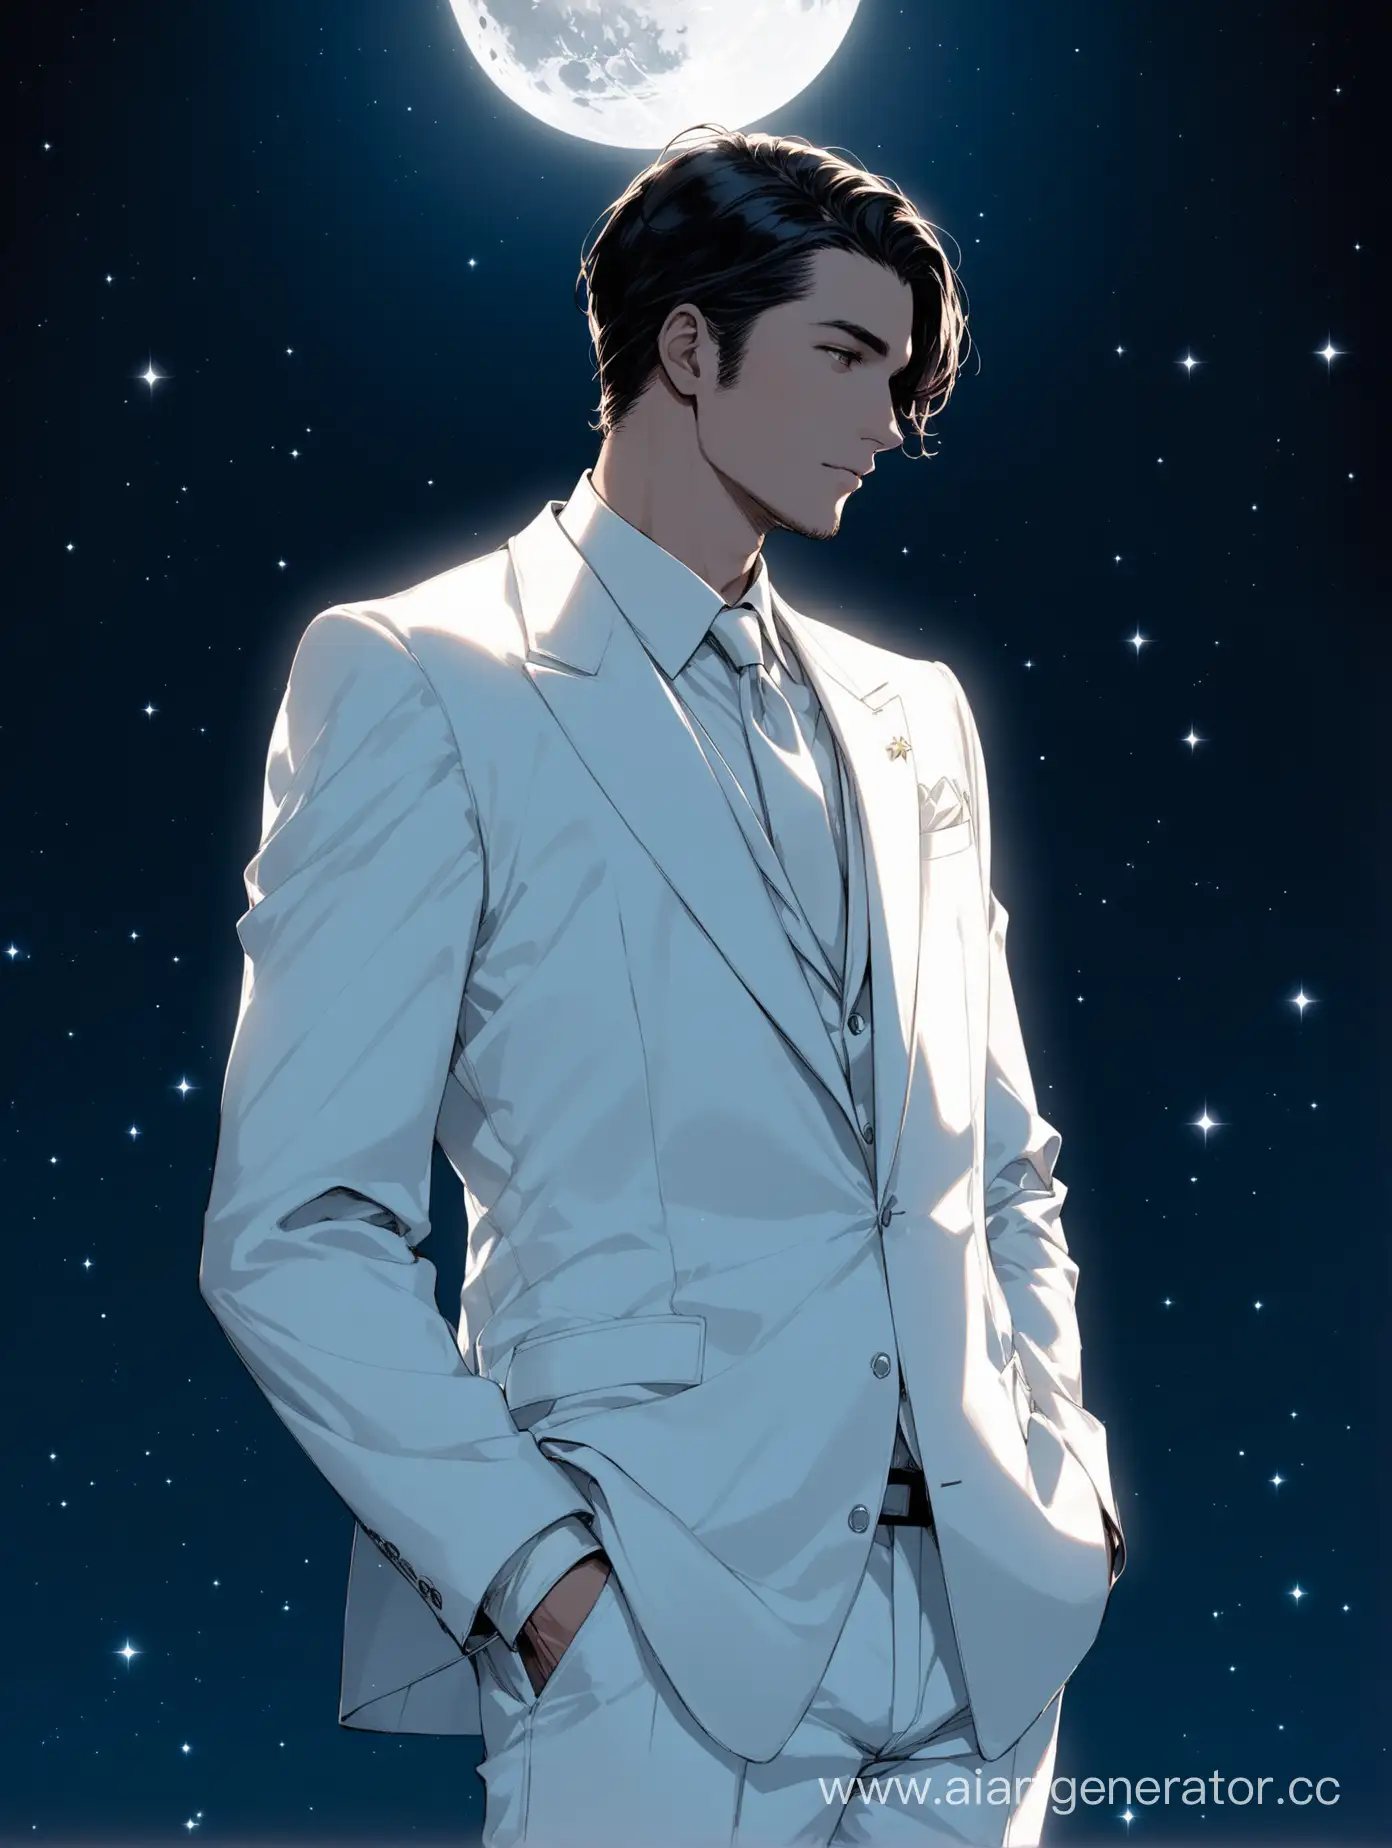 Elegant-StarLike-Man-in-Oversized-White-Suit-Bathed-in-Moonlight